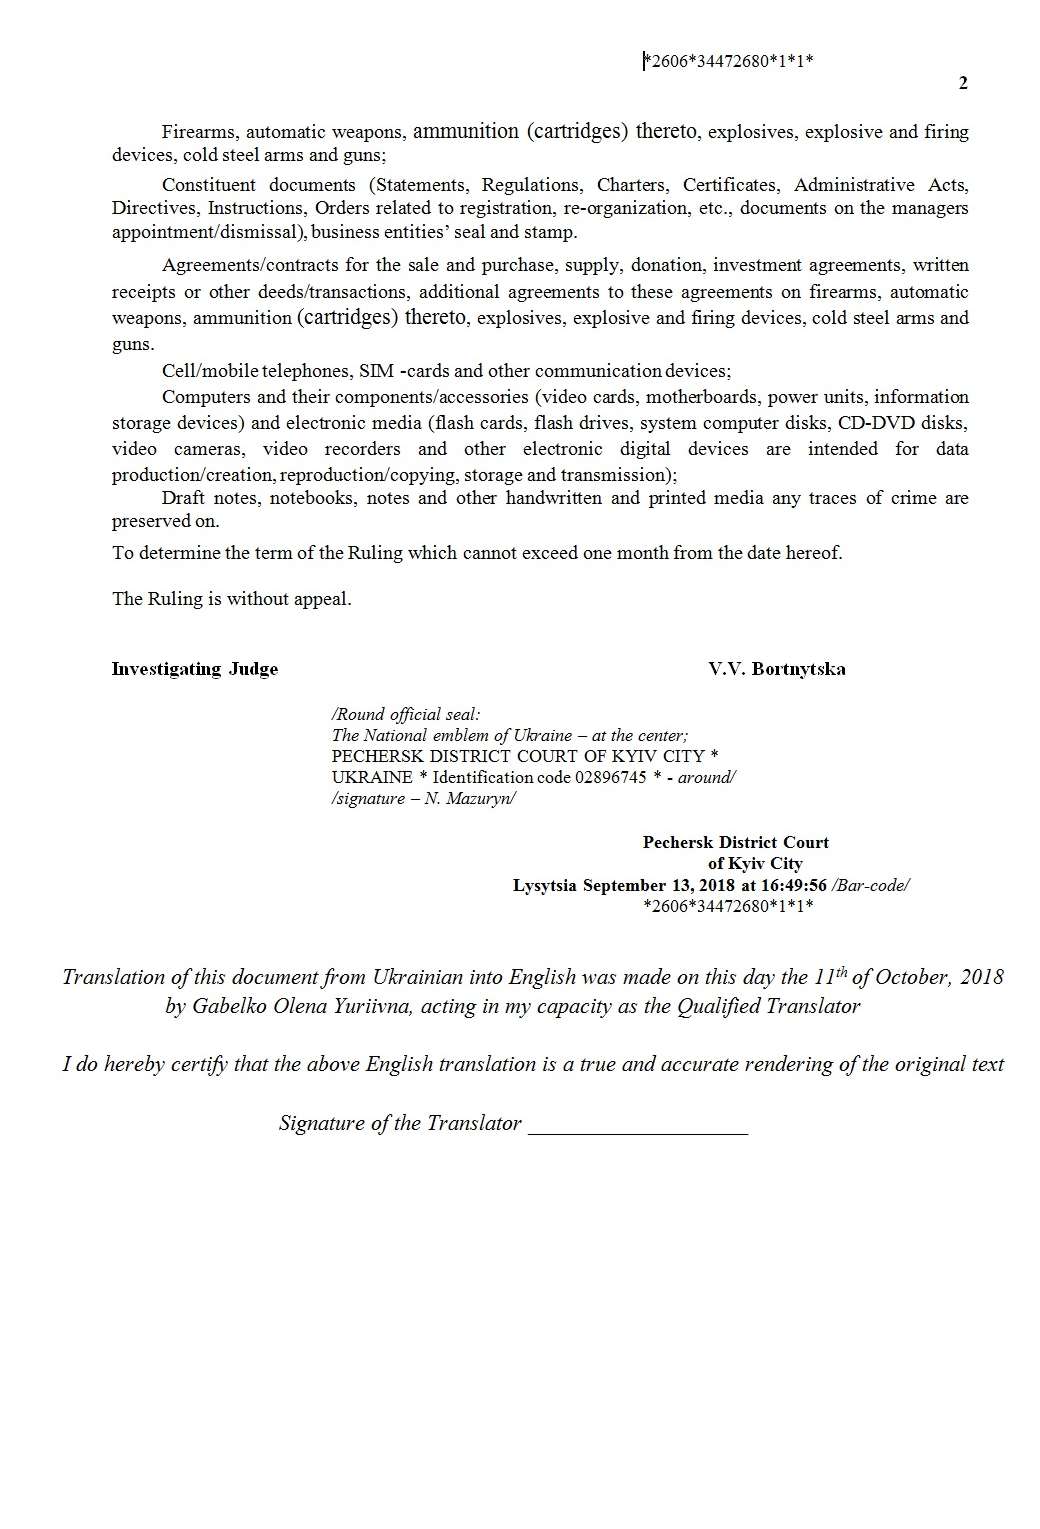 The decision of the Pechersk District Court (English))